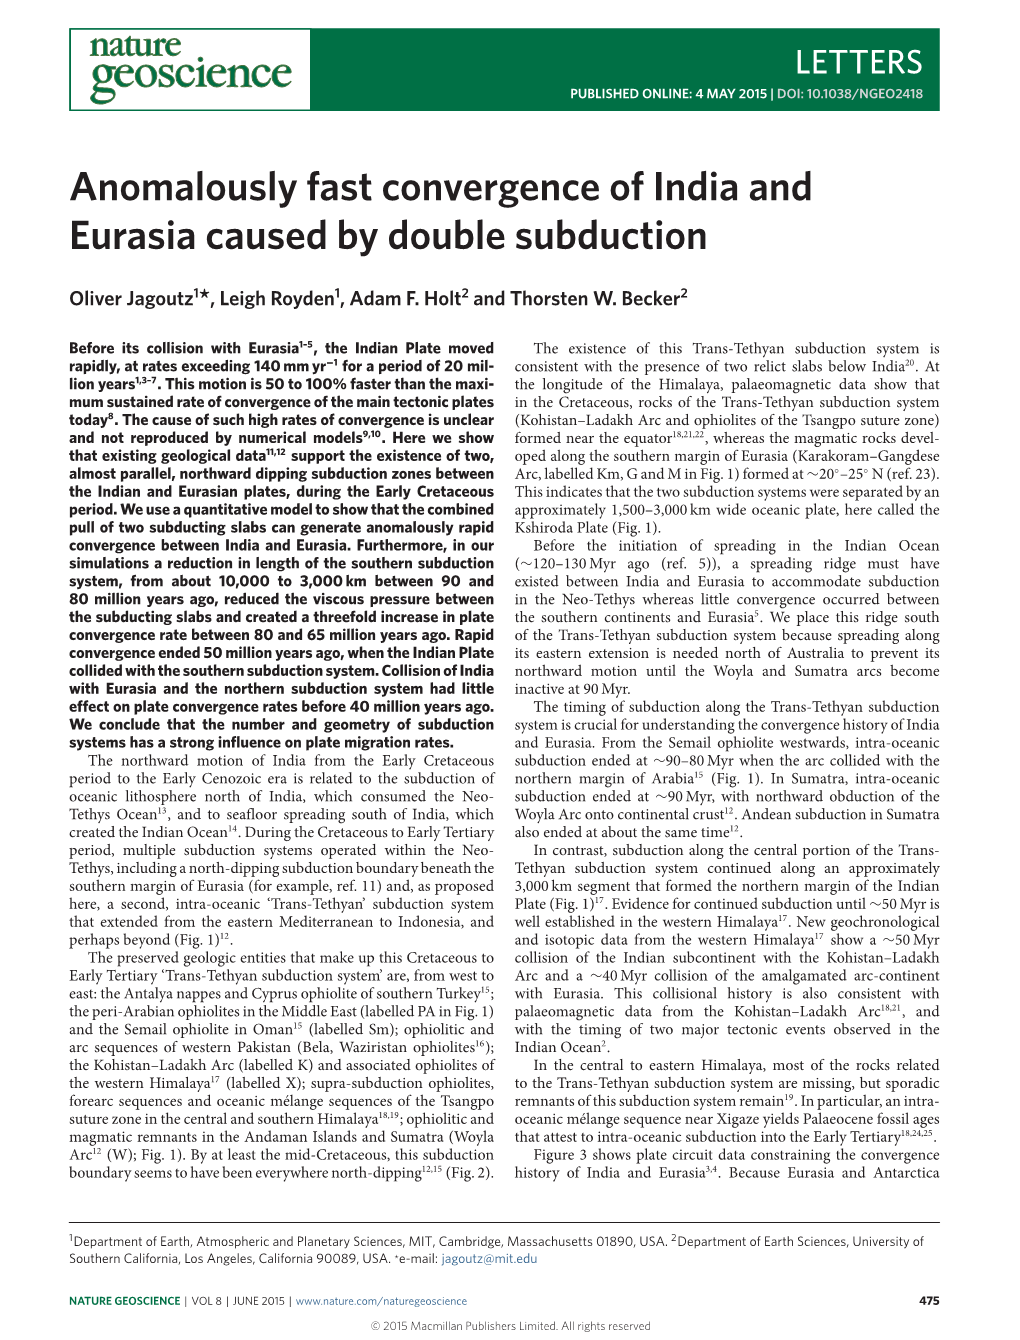 Anomalously Fast Convergence of India and Eurasia Caused by Double Subduction